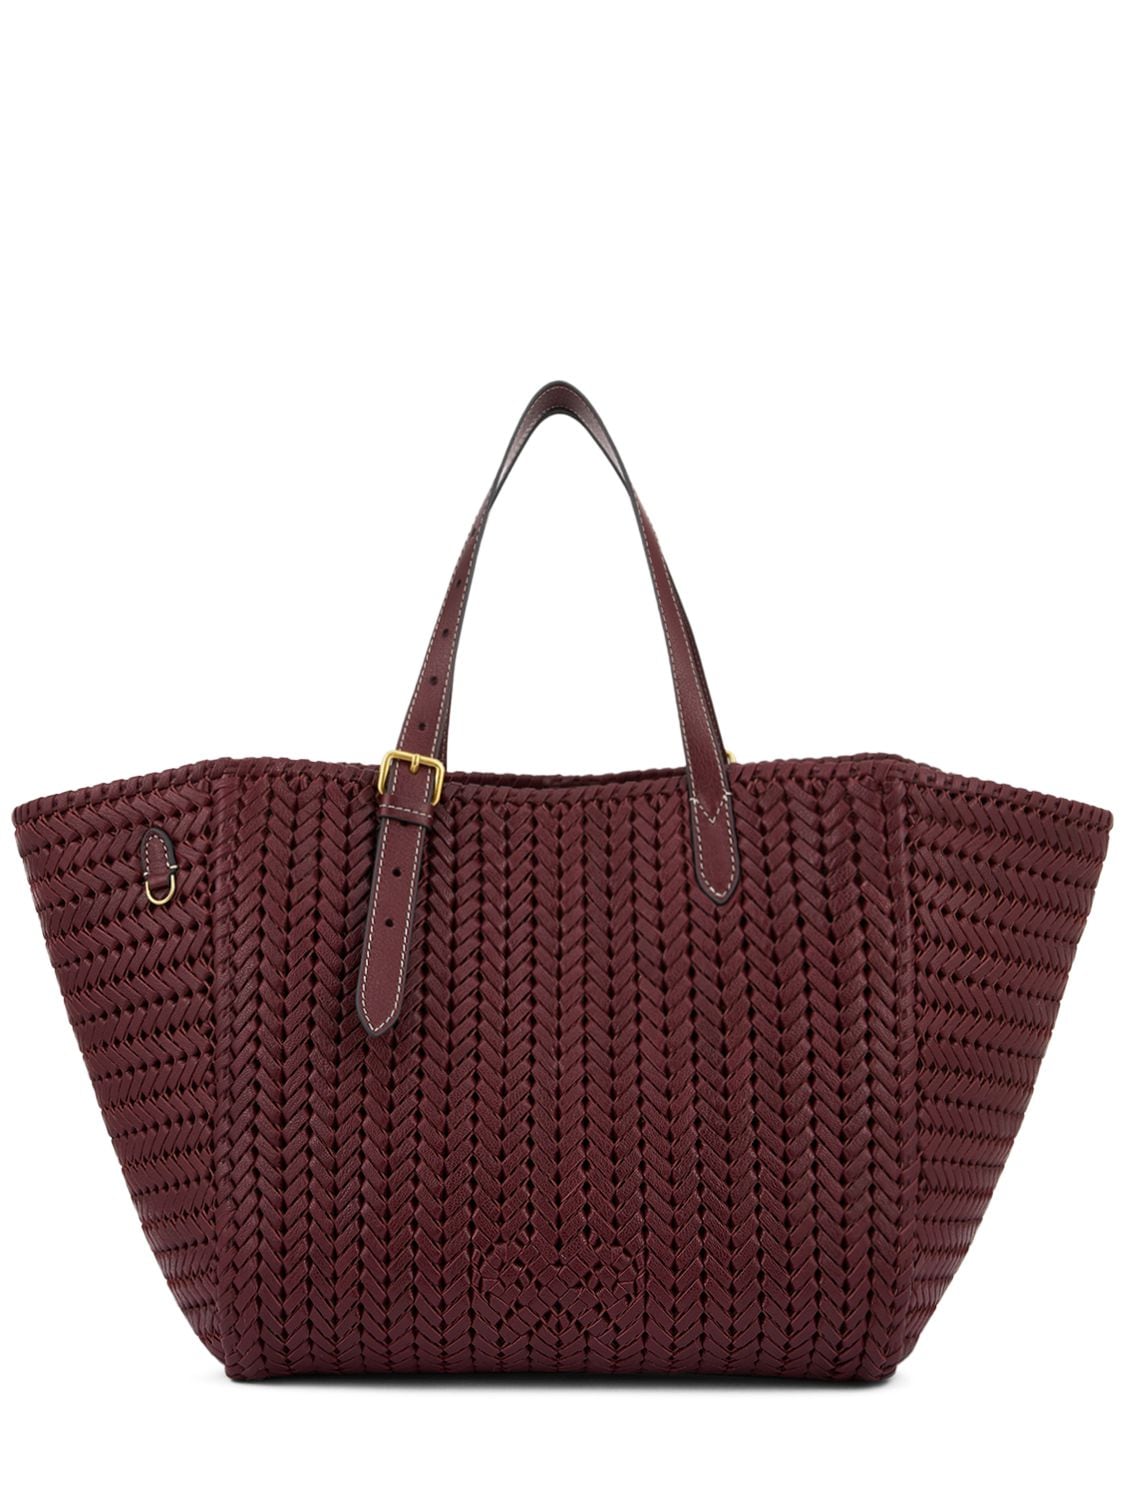 Image of The Neeson Square Leather Tote Bag